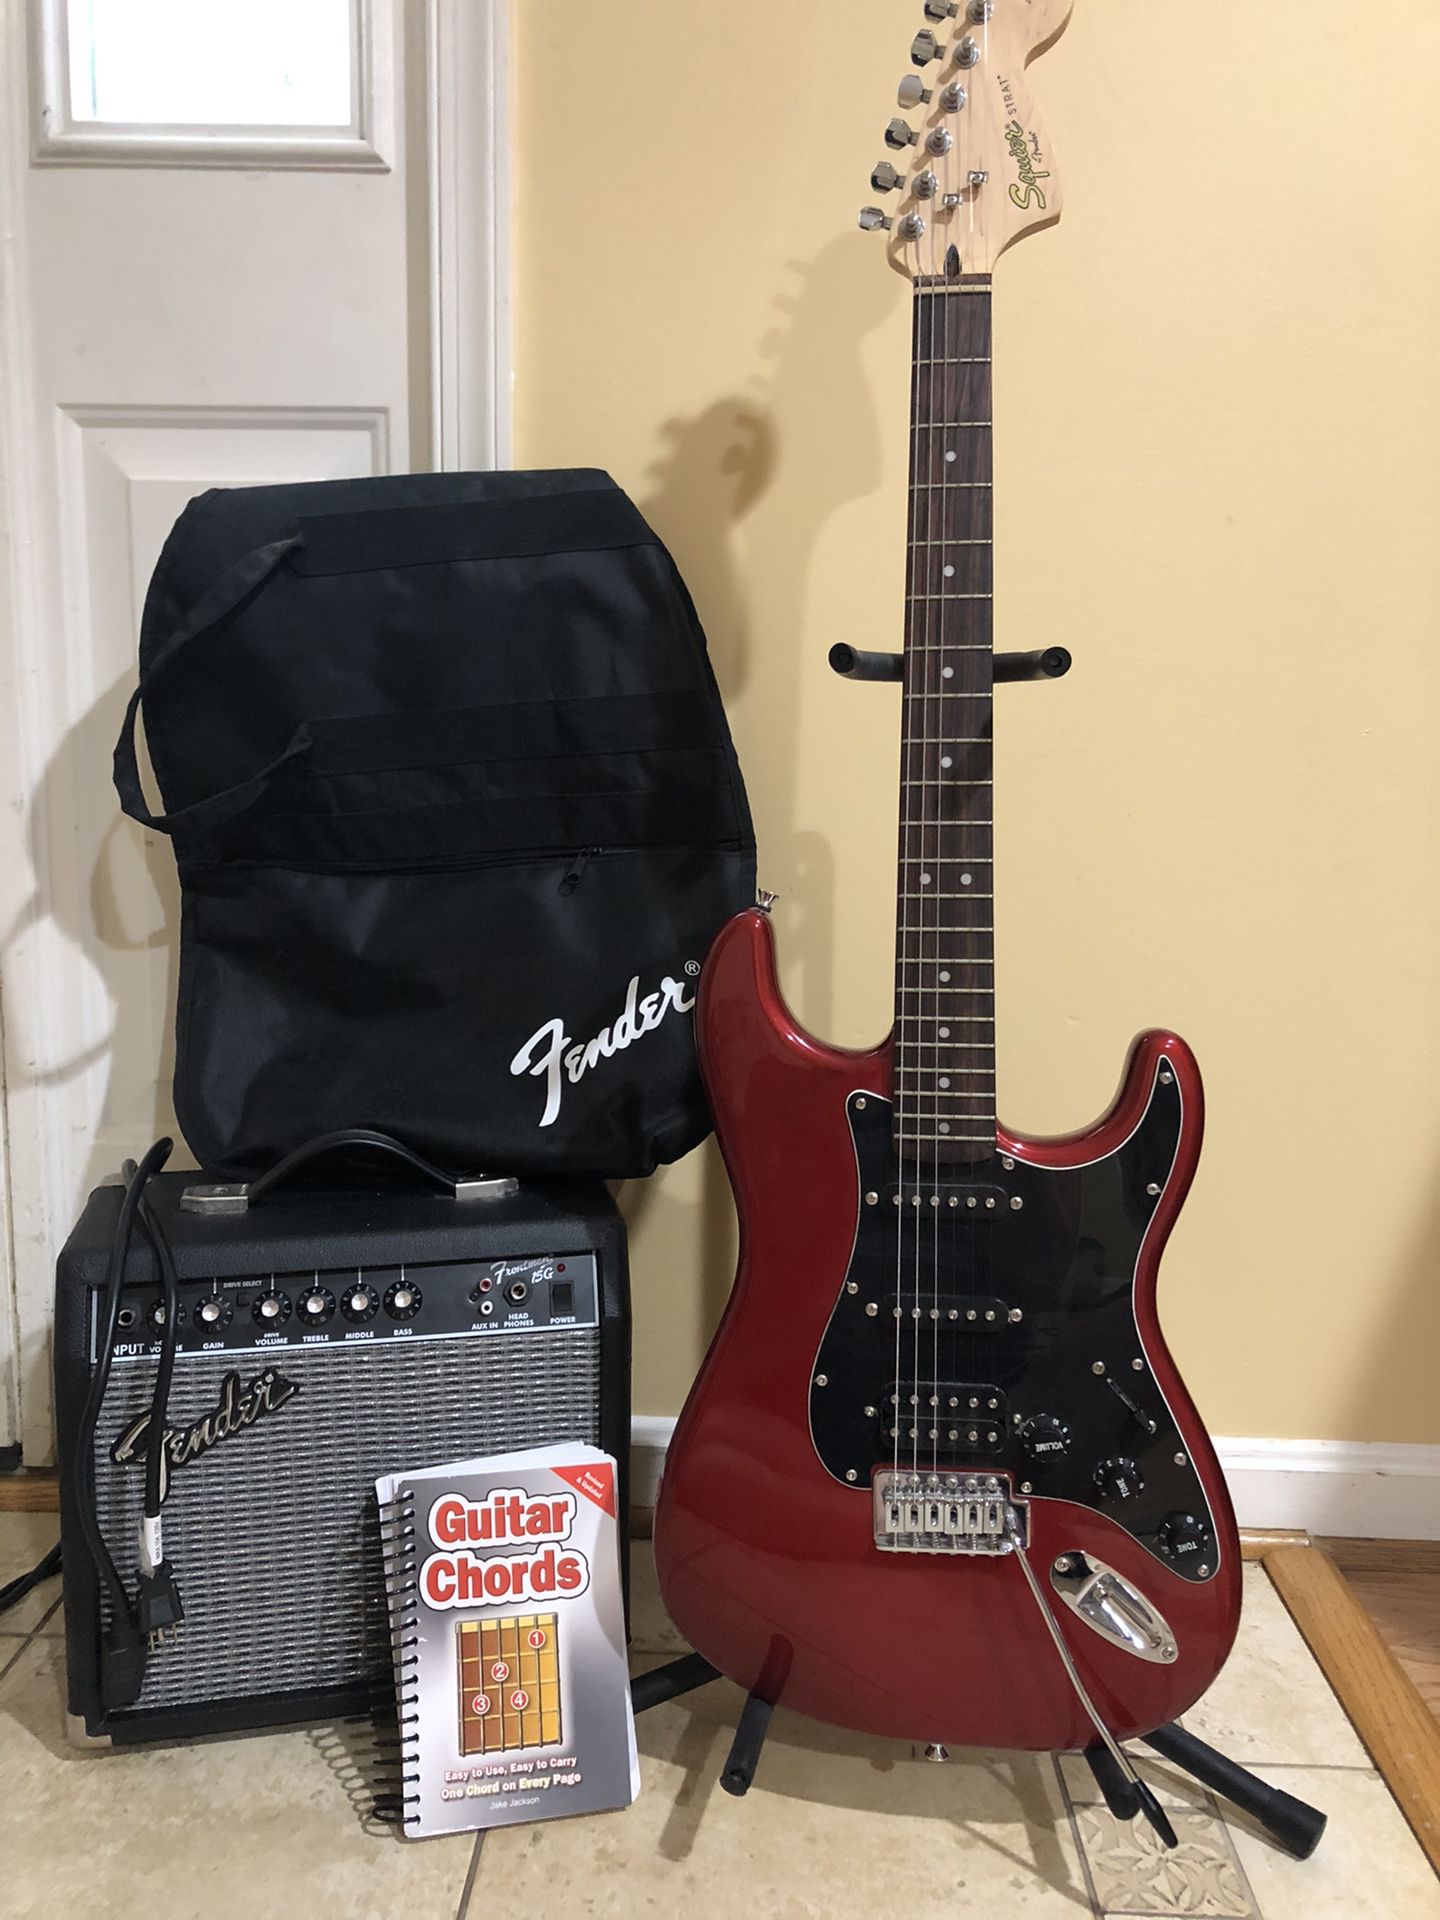 Fender Squire Guitar, Amp, case, stand and chord book